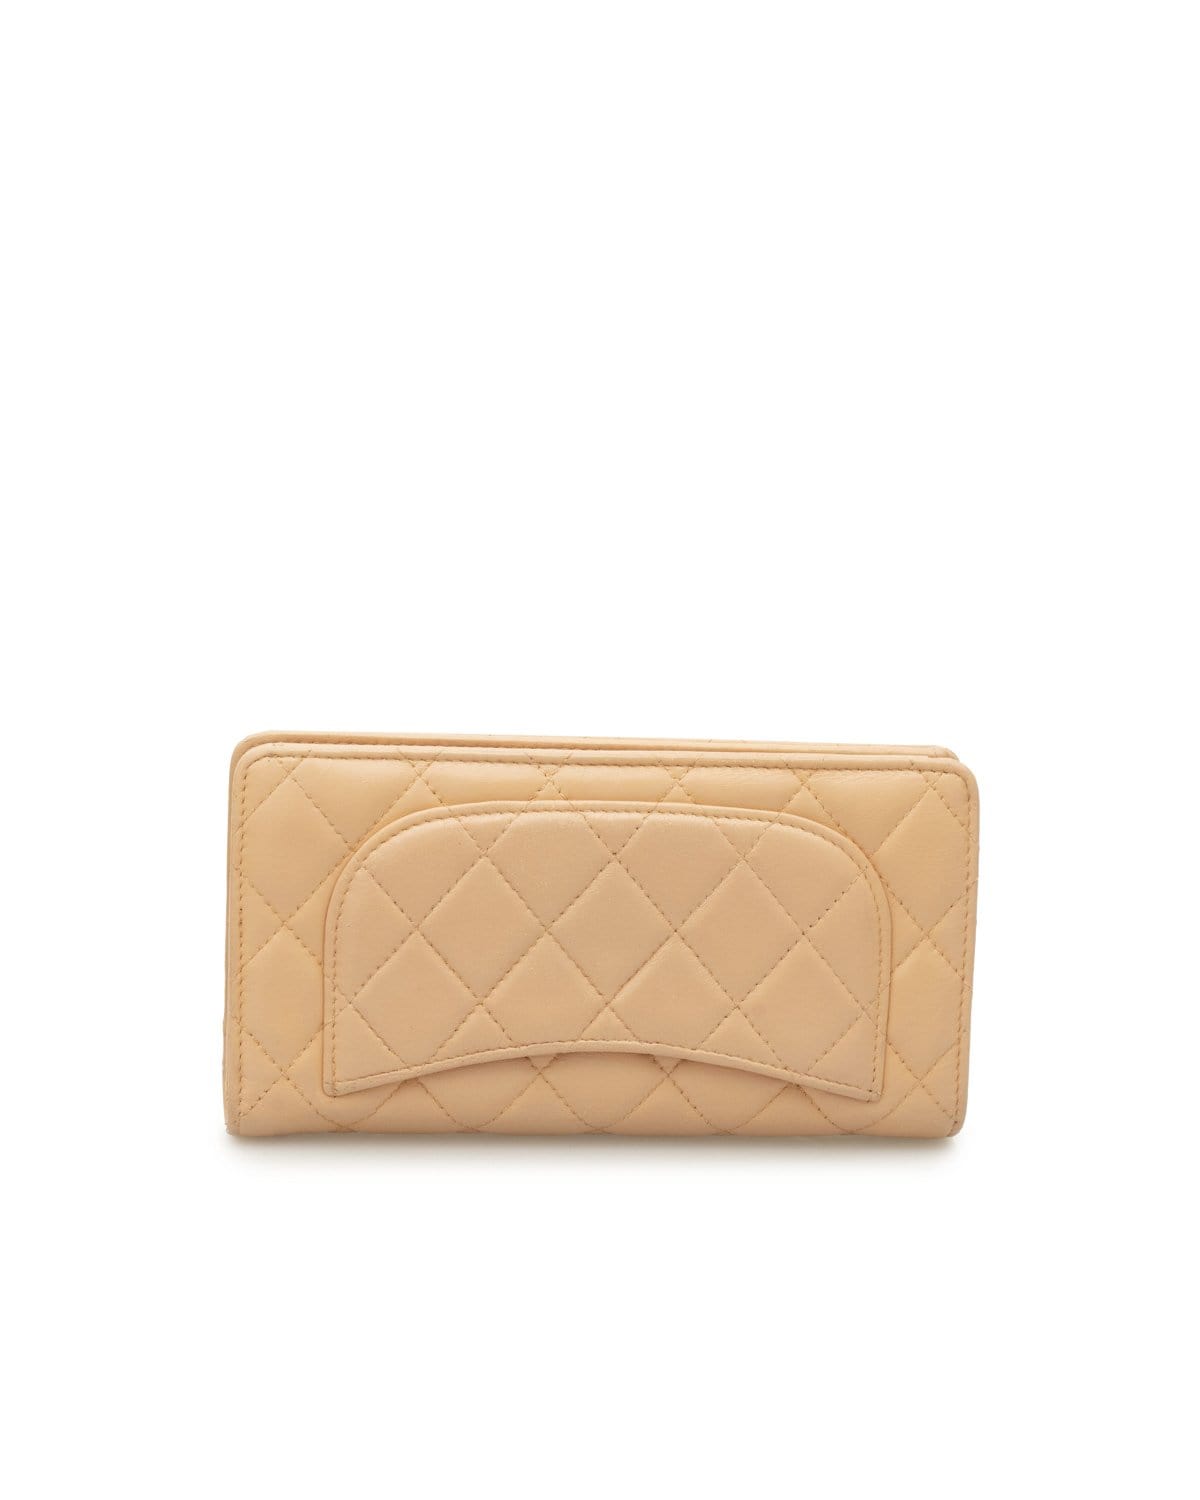 Chanel Chanel Peach Lambskin Quilted Bi-Fold Wallet- AWL1941